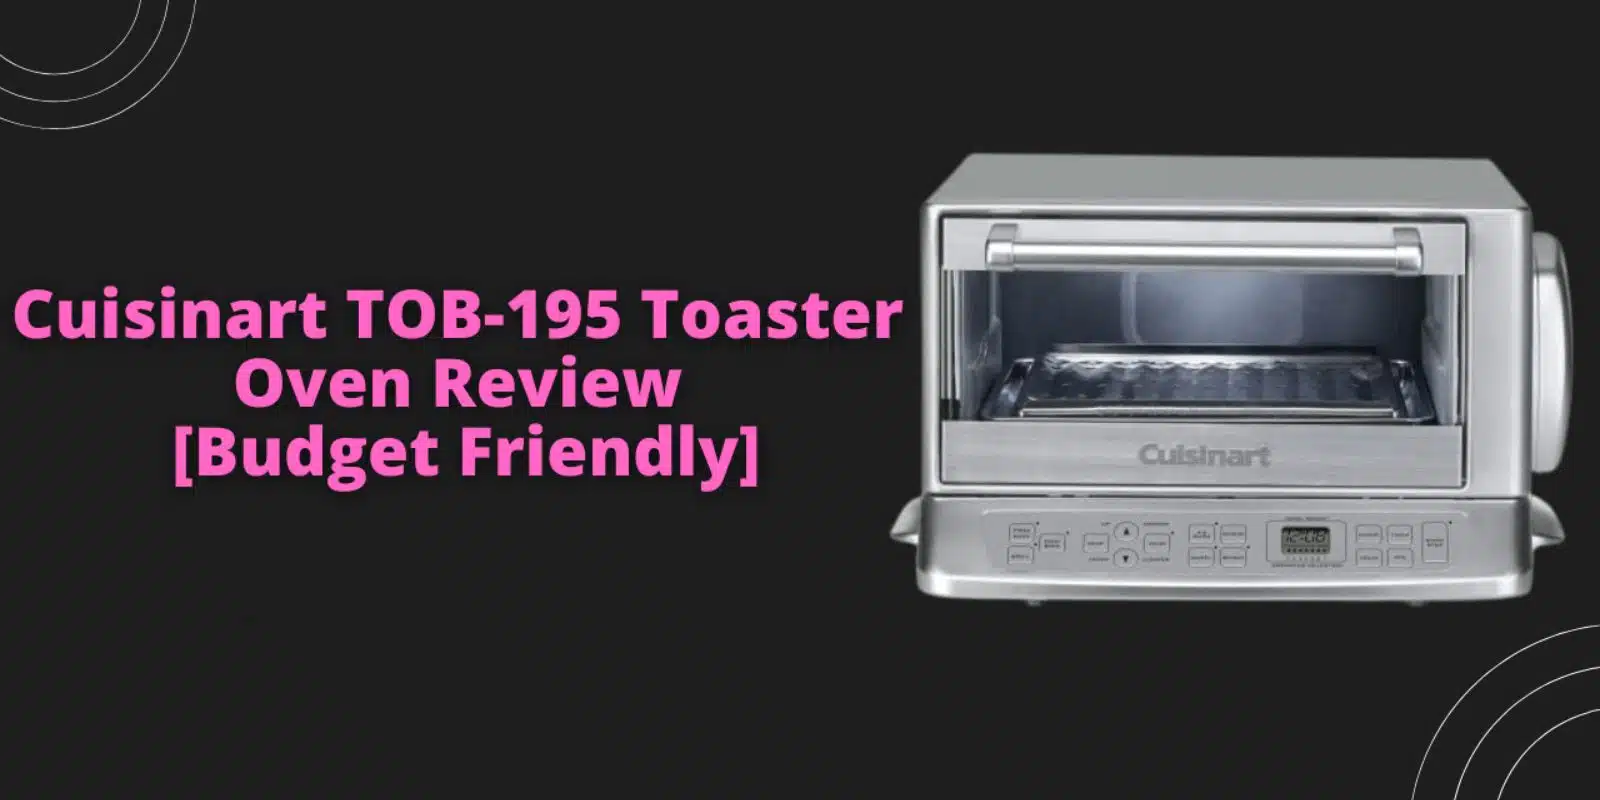 Cuisinart TOB-195 Toaster Oven Review | Specification, Features, Pros & Cons